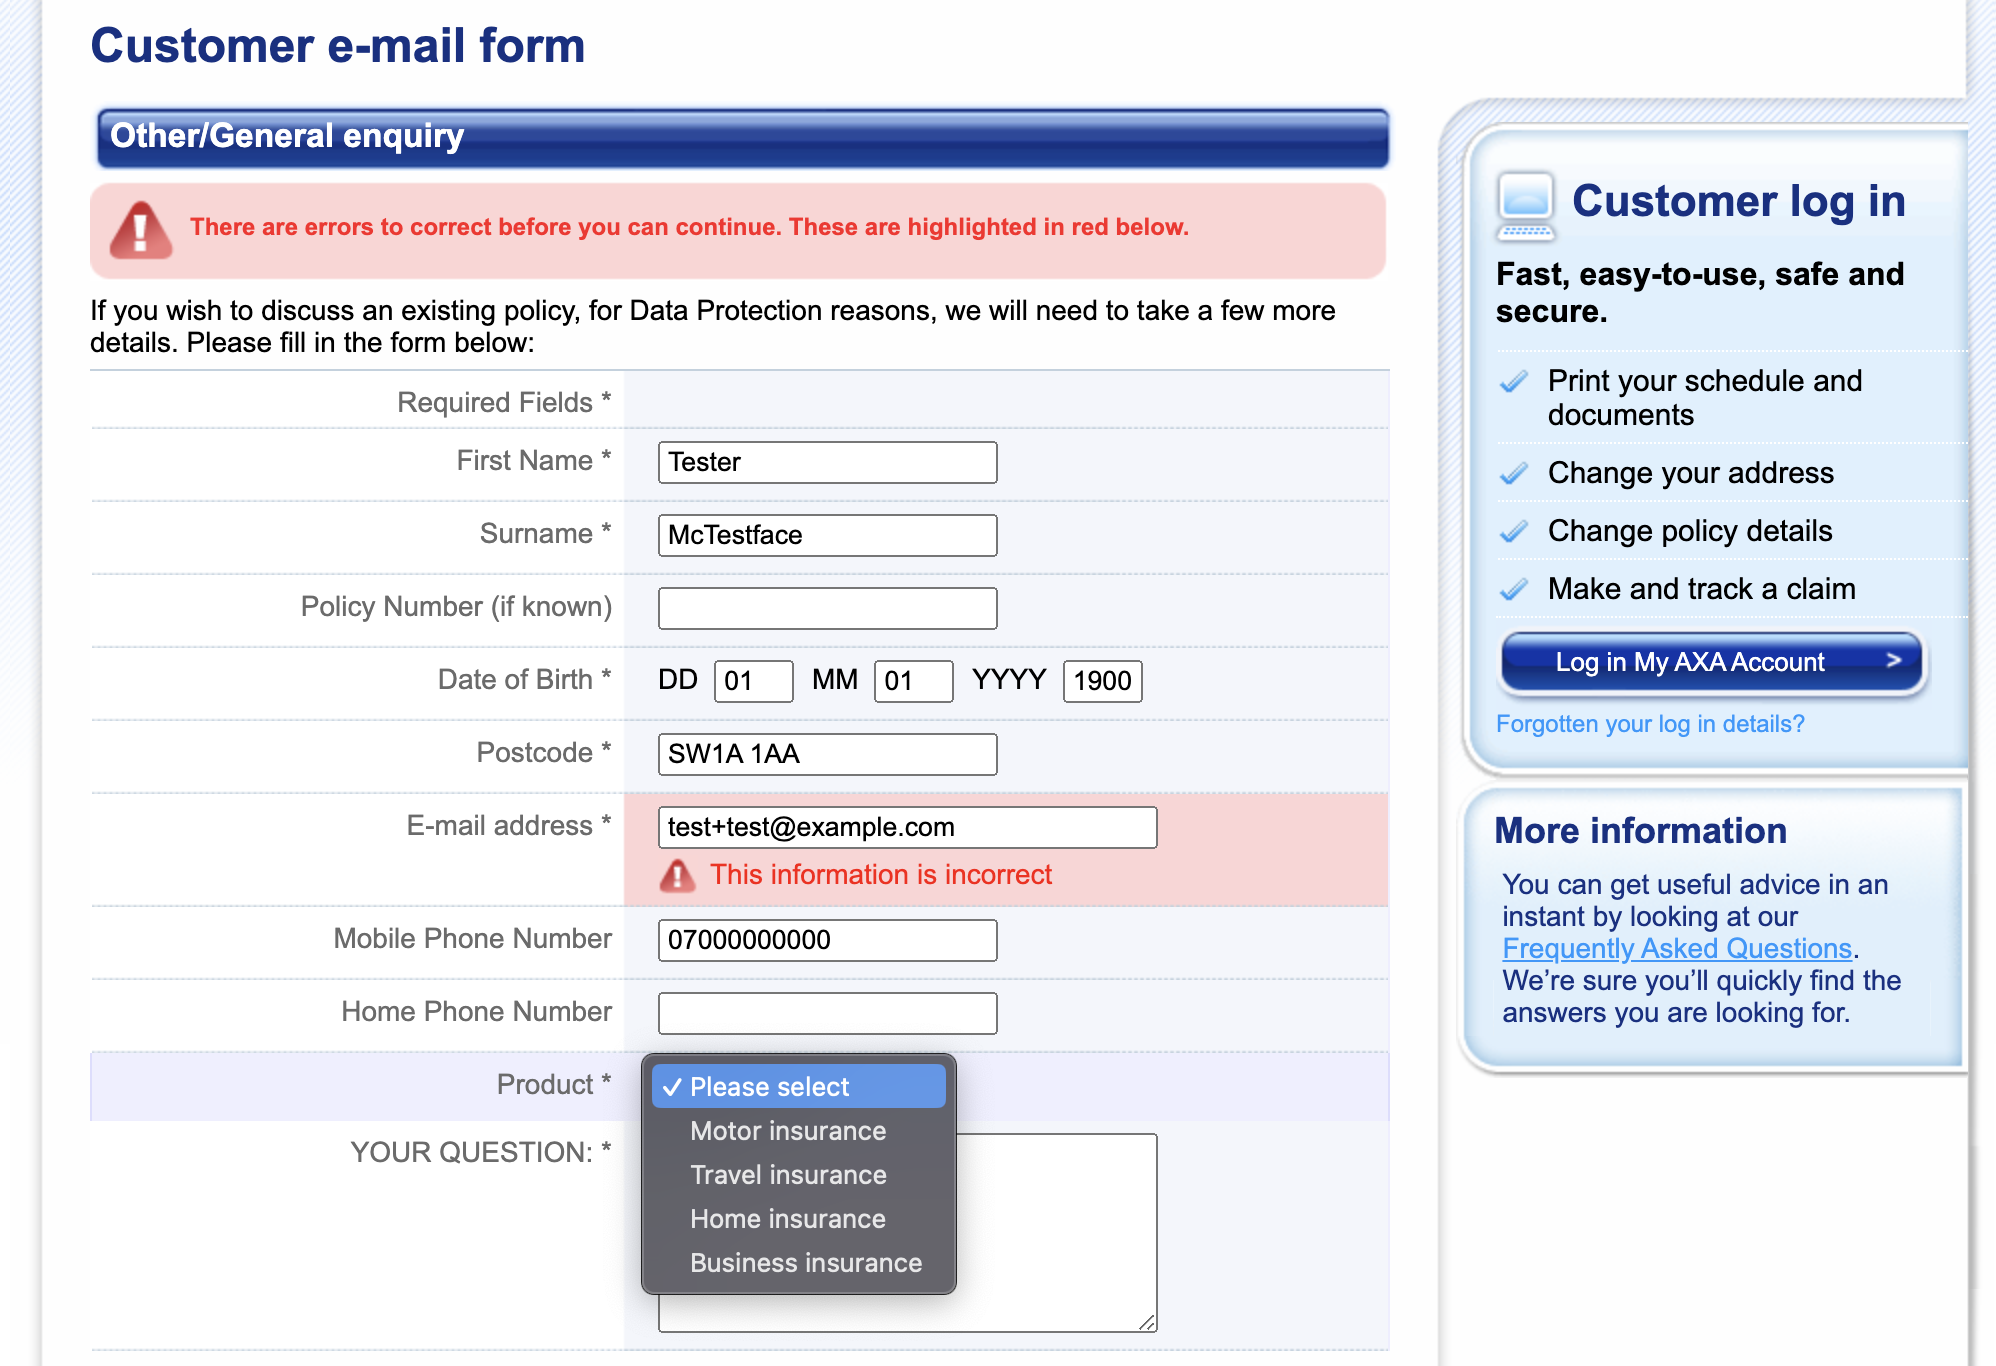 AXA's contact form, showing the email test+test@example.com being rejected, and listing only four insurance products in the dropdown